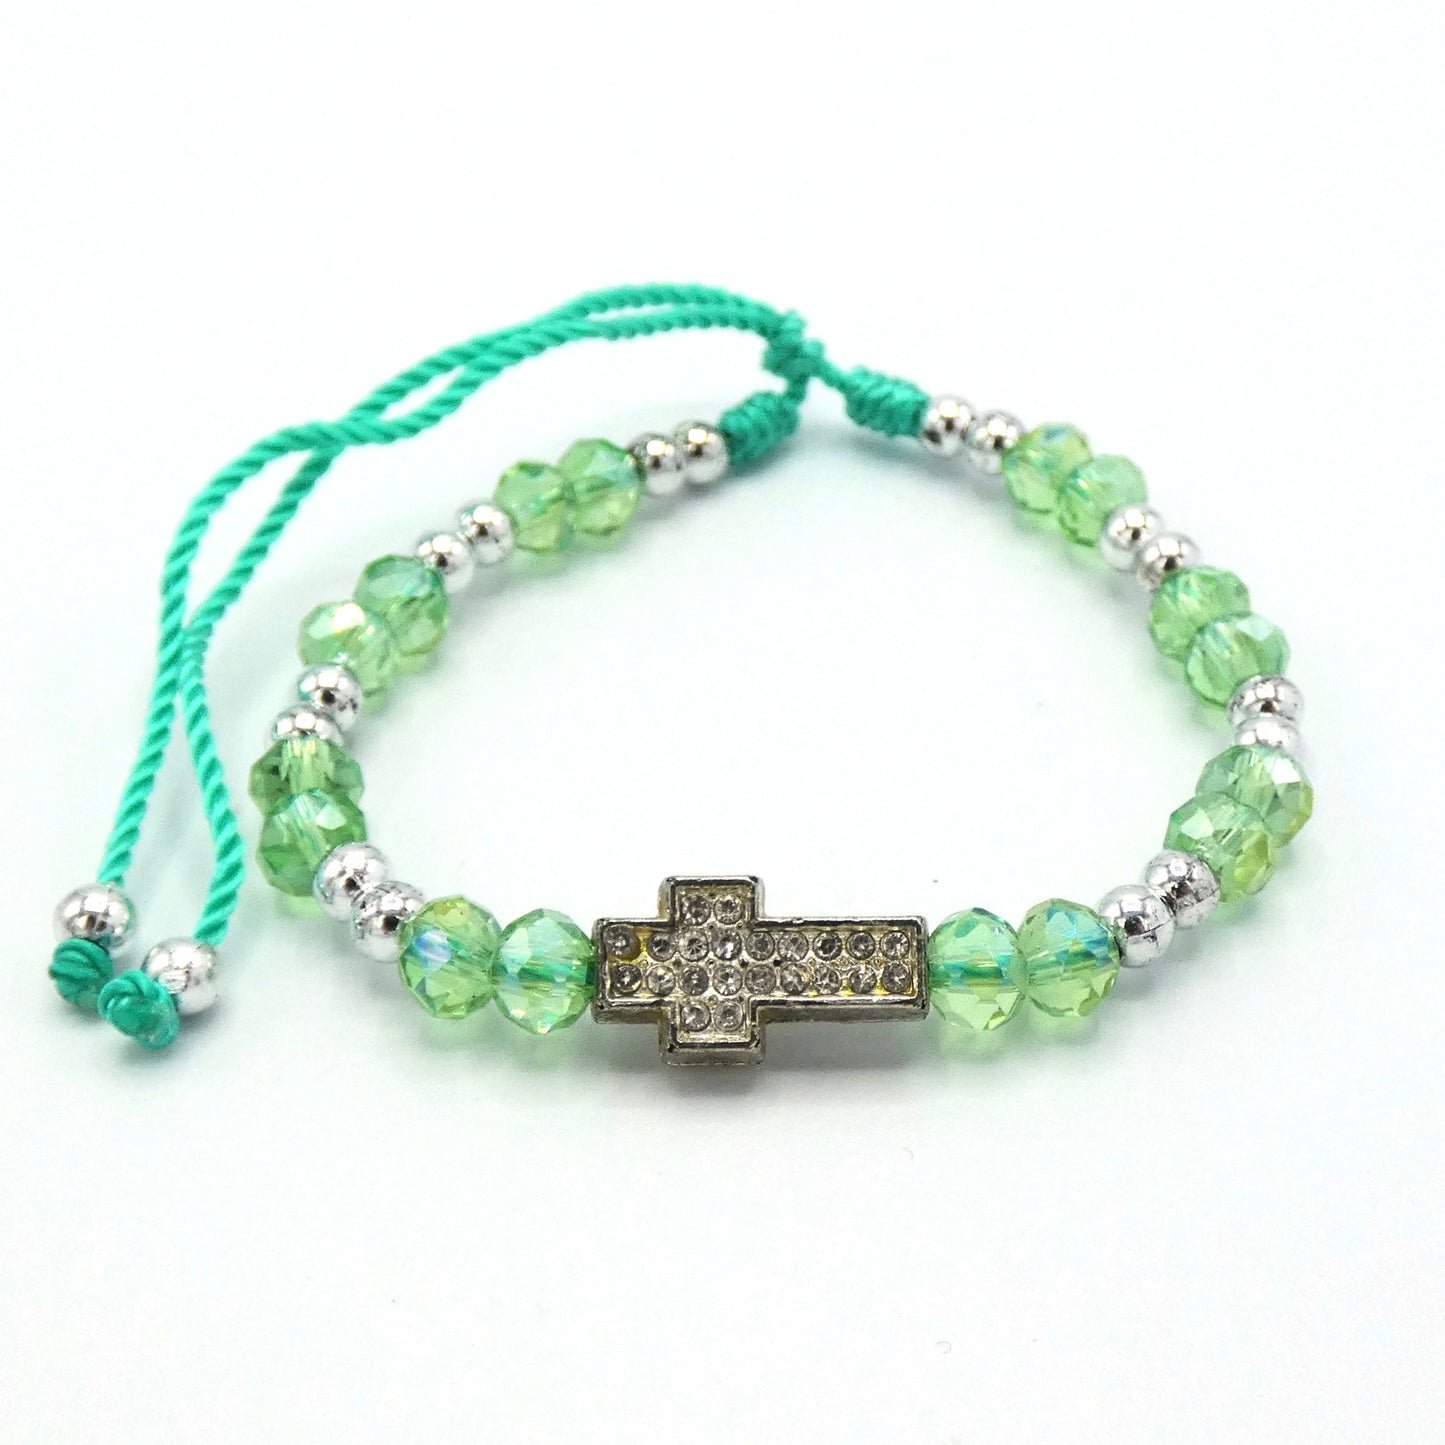 Beaded Bracelet of Assorted Colors with Rhinestone Cross